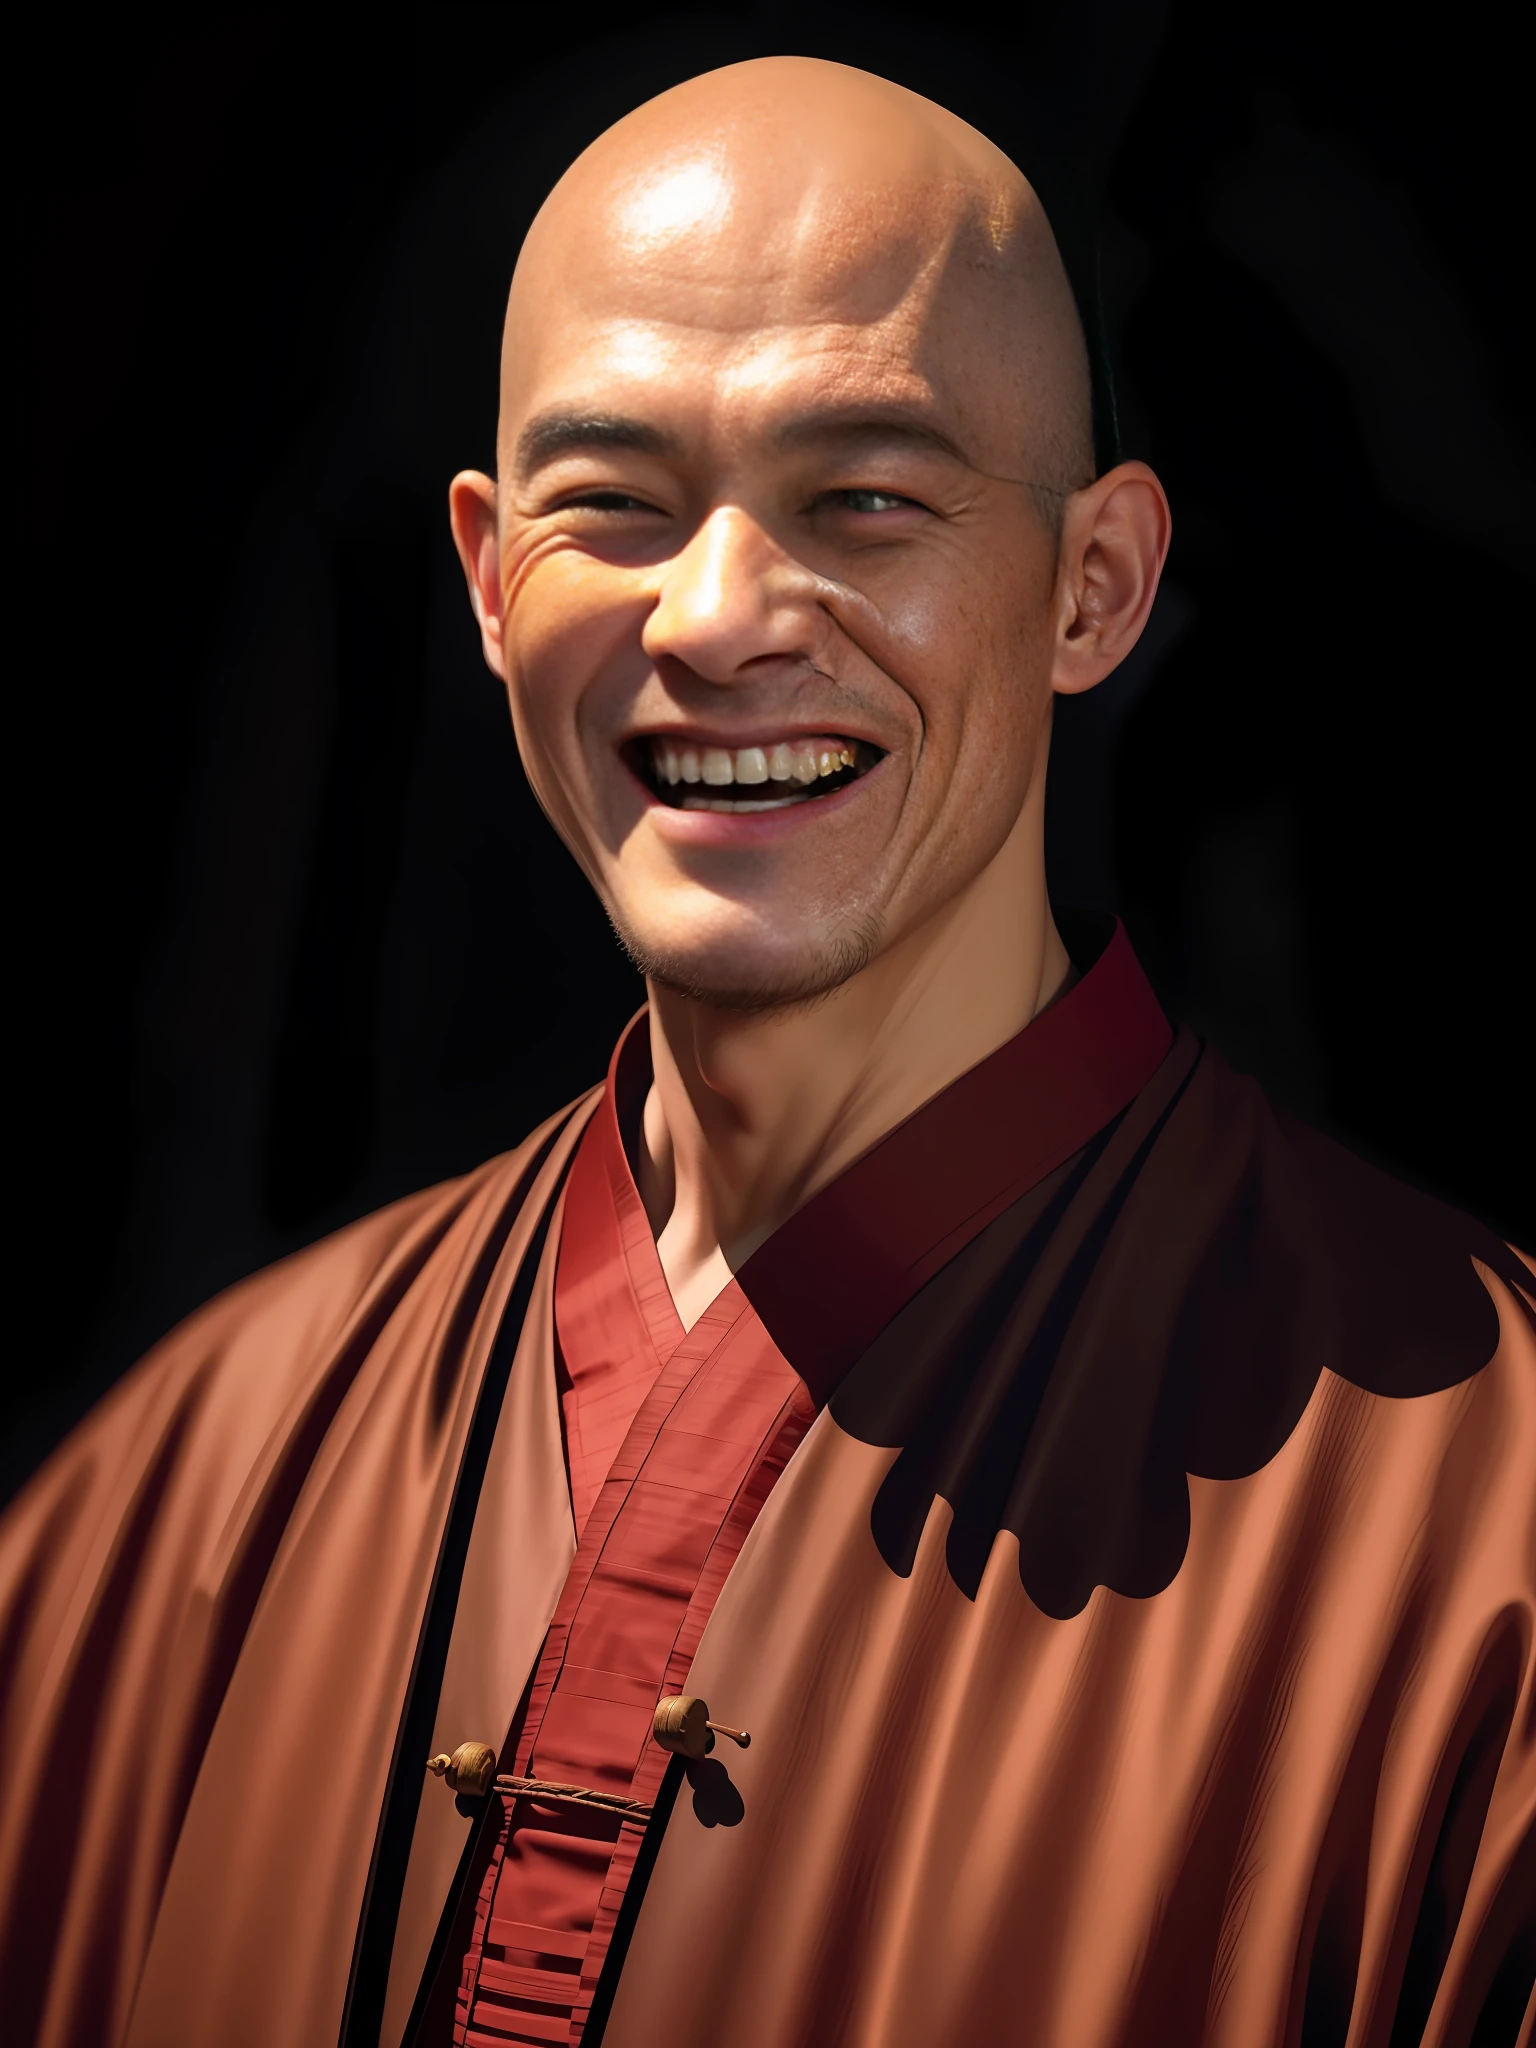 fusionart ,,fashi 1man, ancient china monk laughing, strong, bald, dramatic impressive expression, dramatic linear delicacy, in dark, deep shadow, low key, cold light